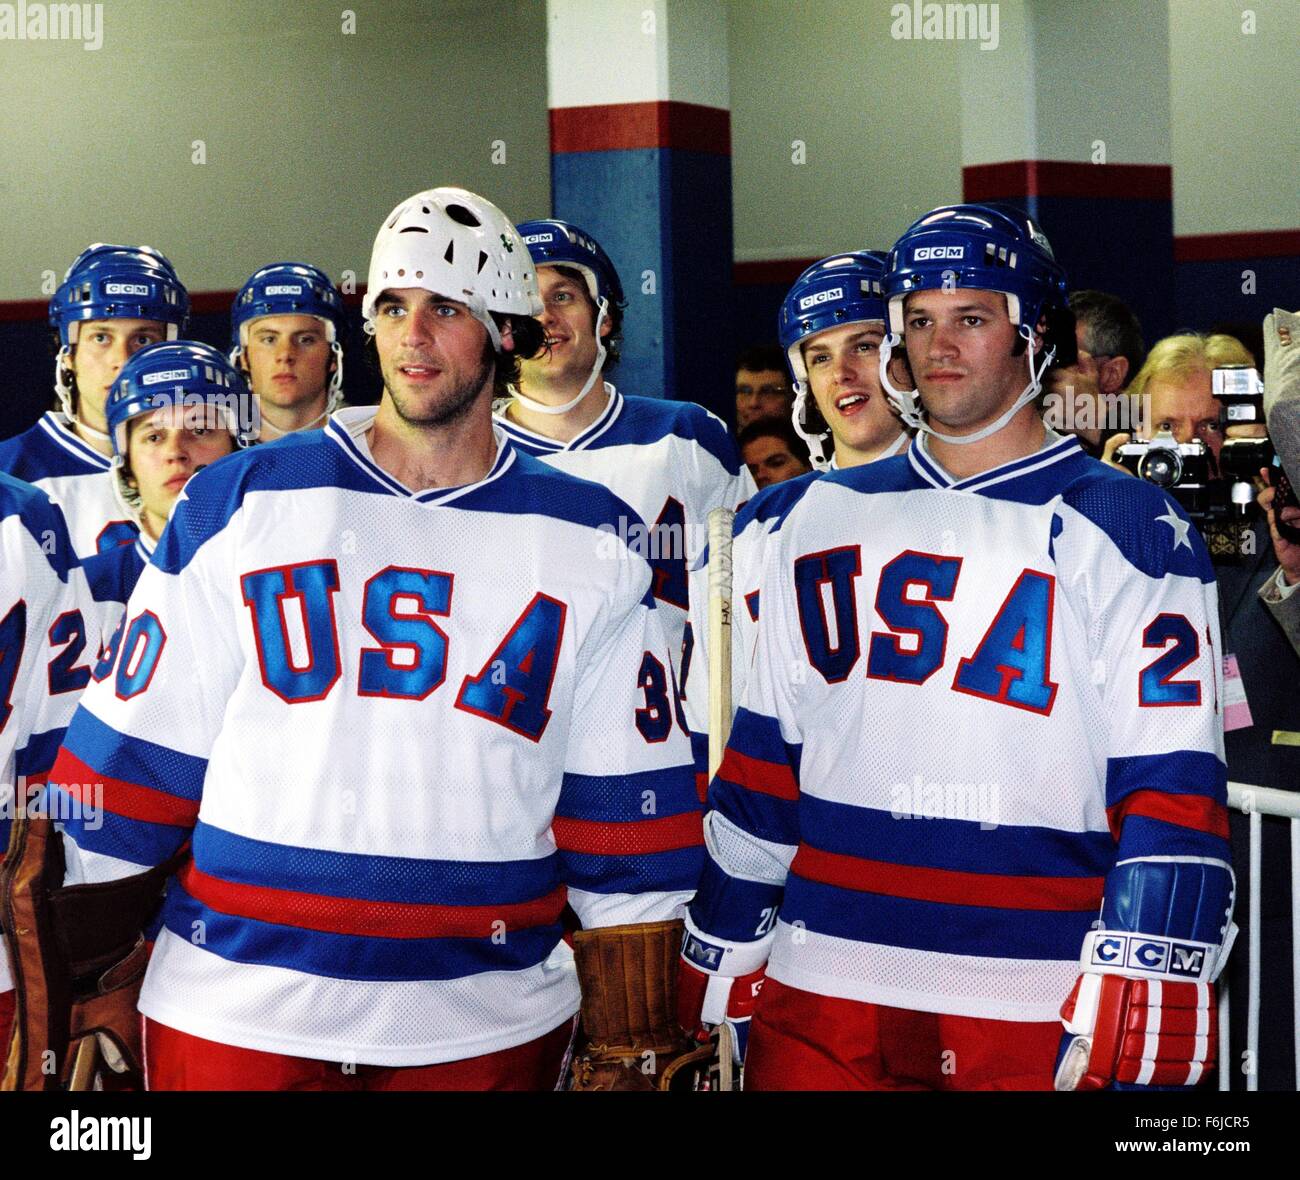 RELEASE DATE: February 6, 2004. MOVIE TITLE: Miracle. STUDIO: Walt Disney Pictures. PLOT: Miracle tells the true story of Herb Brooks (Russell), the player-turned-coach who led the 1980 U.S. Olympic hockey team to victory over the seemingly invincible Russian squad. PICTURED: EDDIE CAHILL as Jim Craig and PATRICK O'BRIEN DEMPSEY as Mike Eruzione. Stock Photo